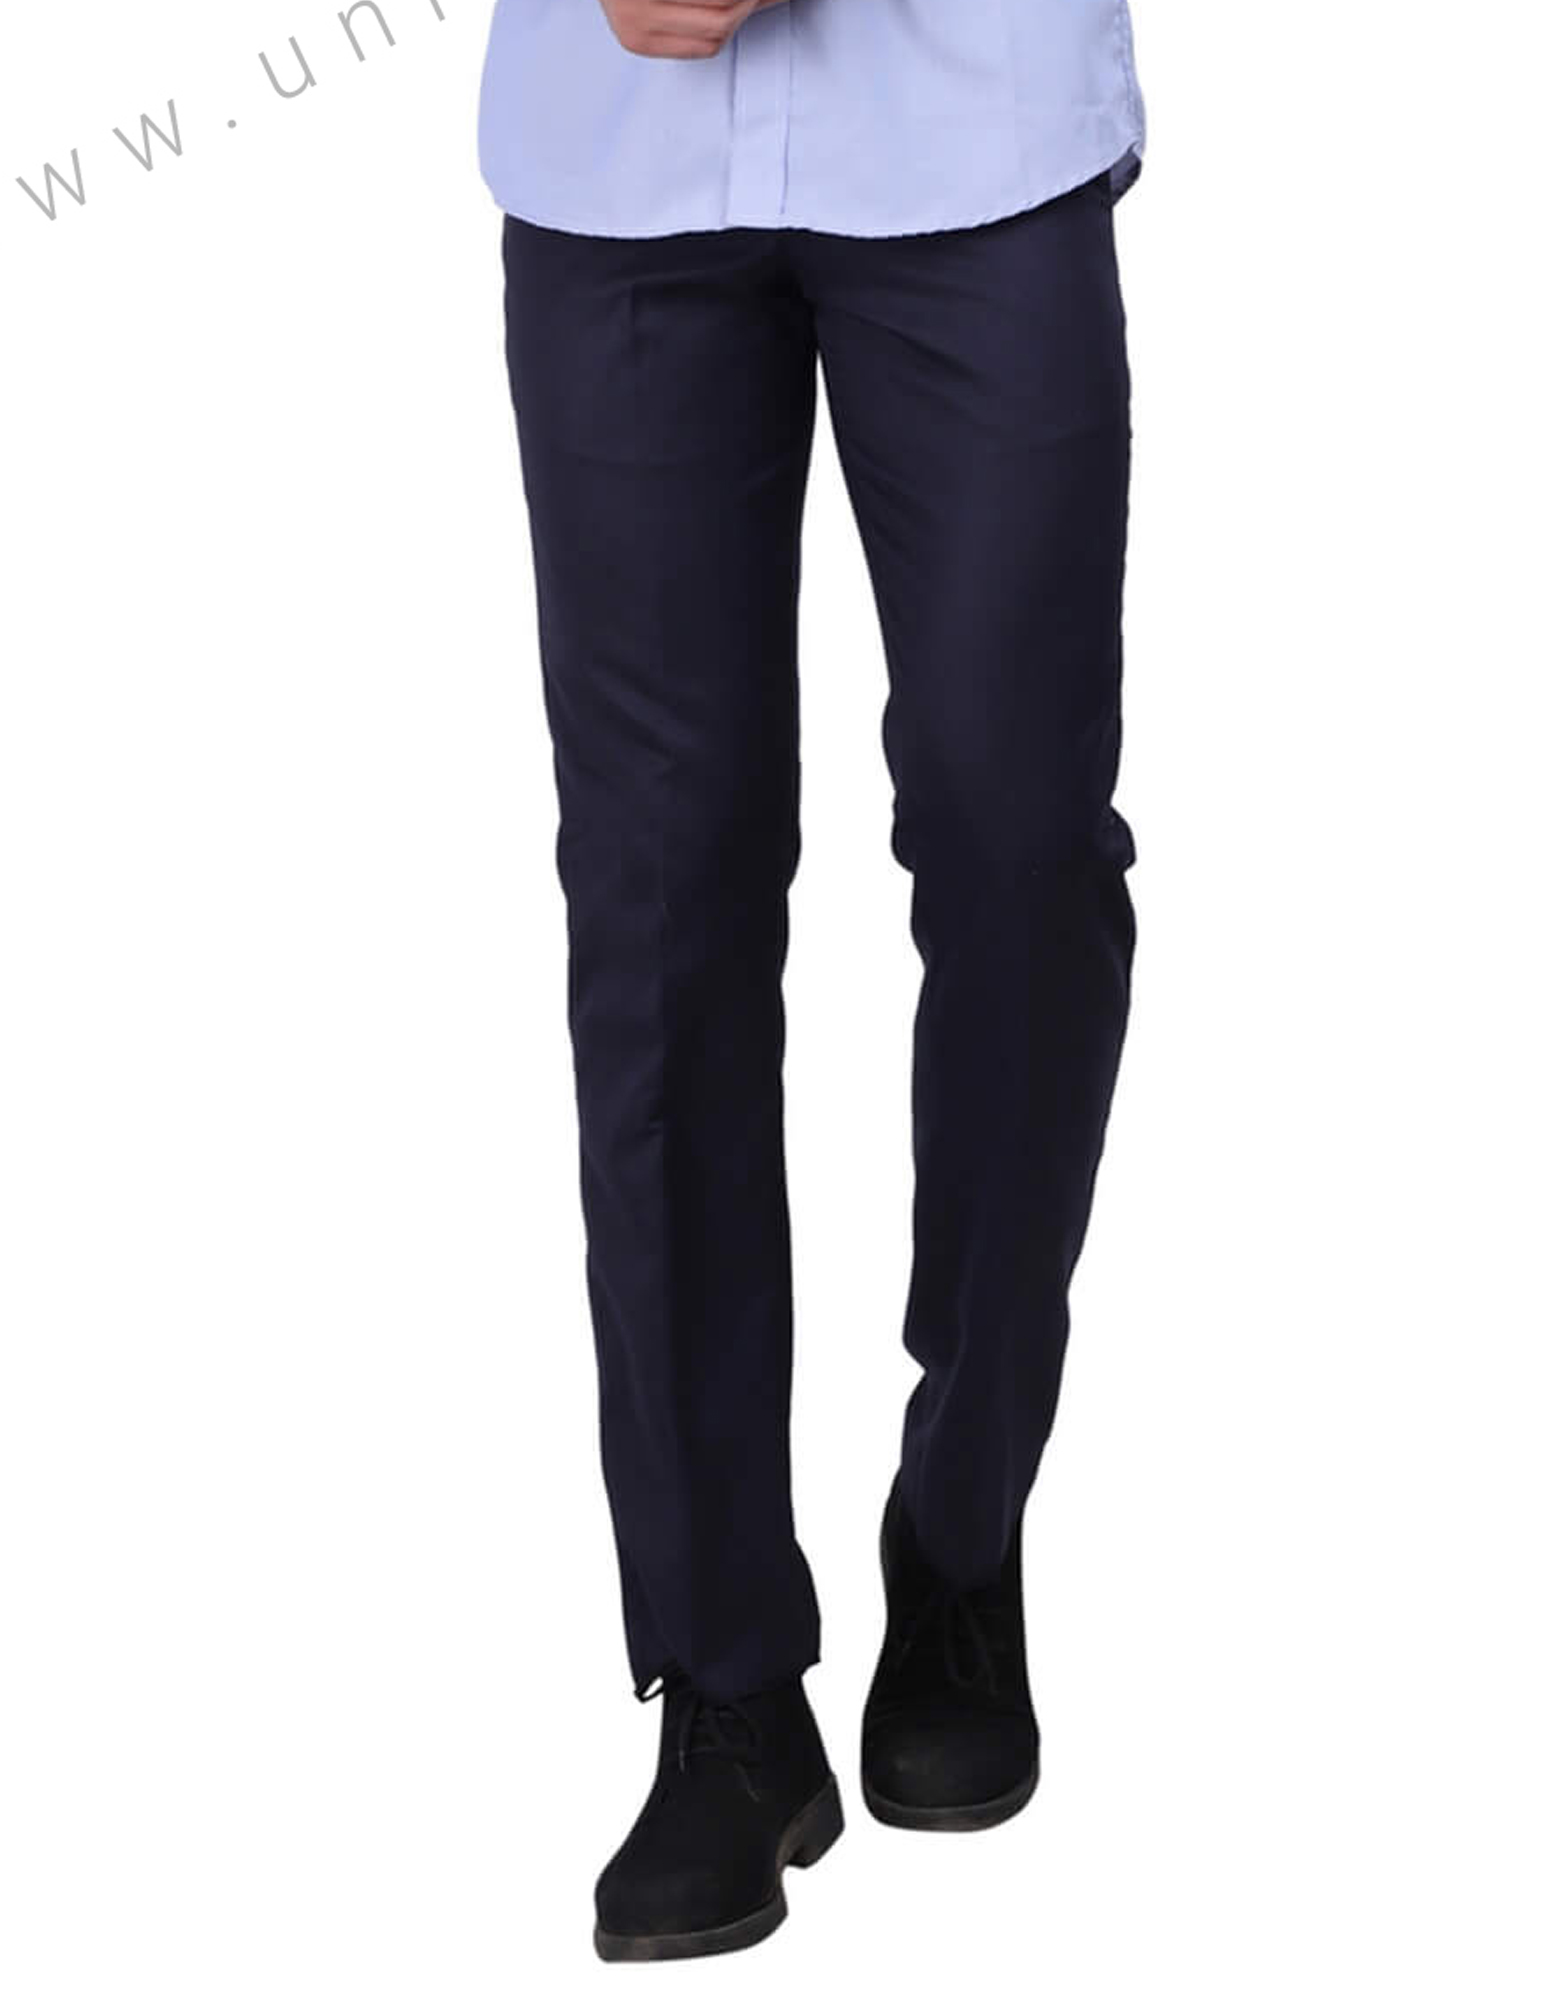 Jeans & Pants | Navy Blue Formal Pants Brand new quality. | Freeup